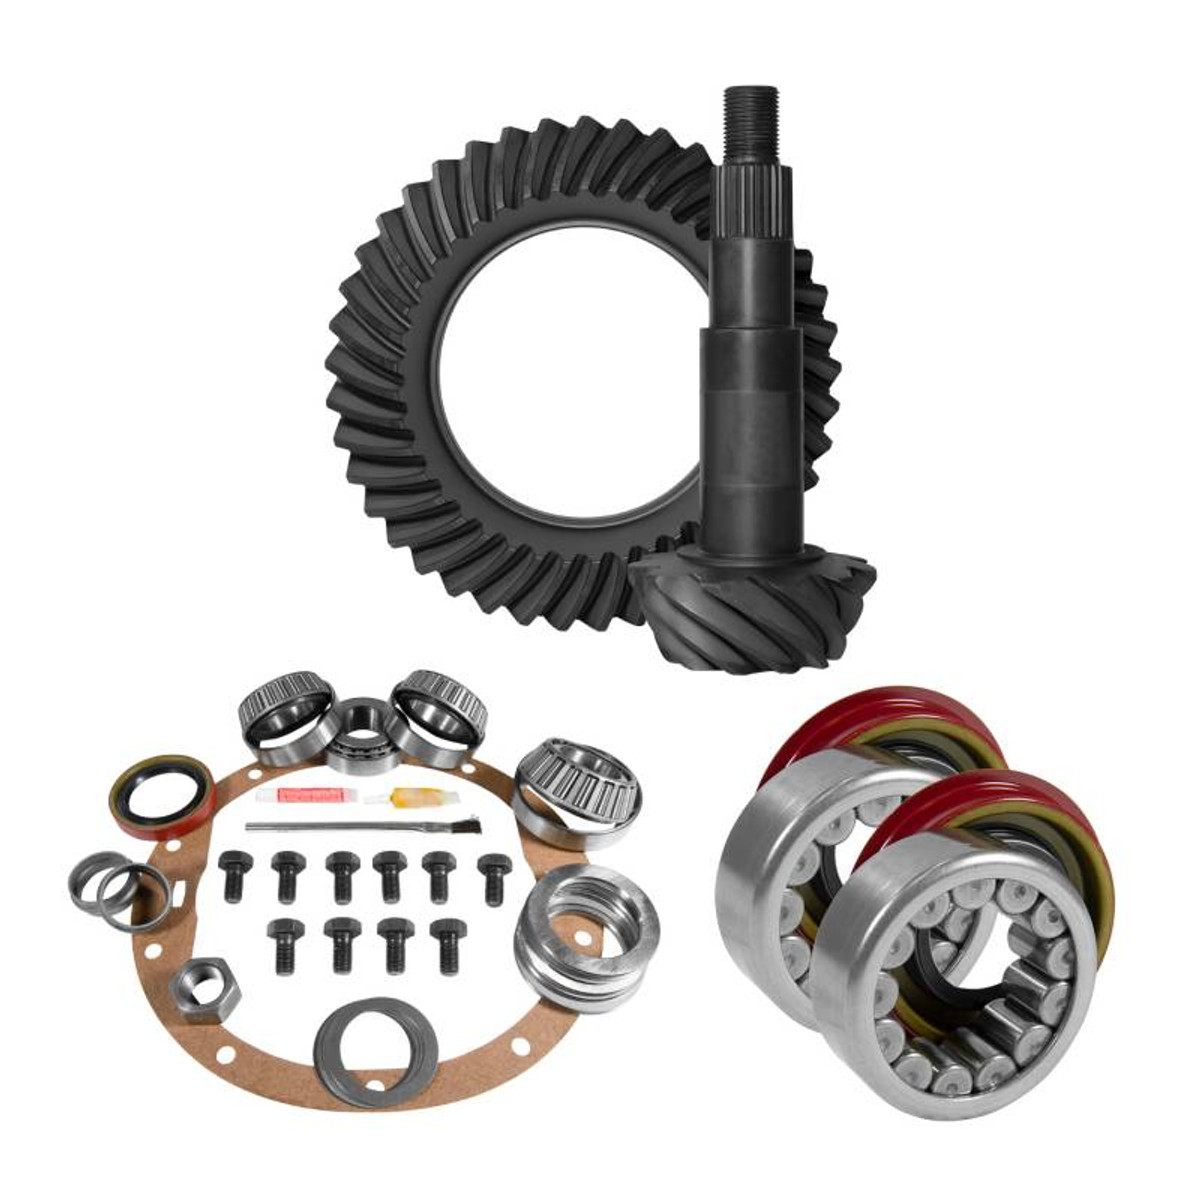 8.5 inch GM 4.11 Rear Ring and Pinion Install Kit Axle Bearings 1.78 inch Case Journal YGK2008